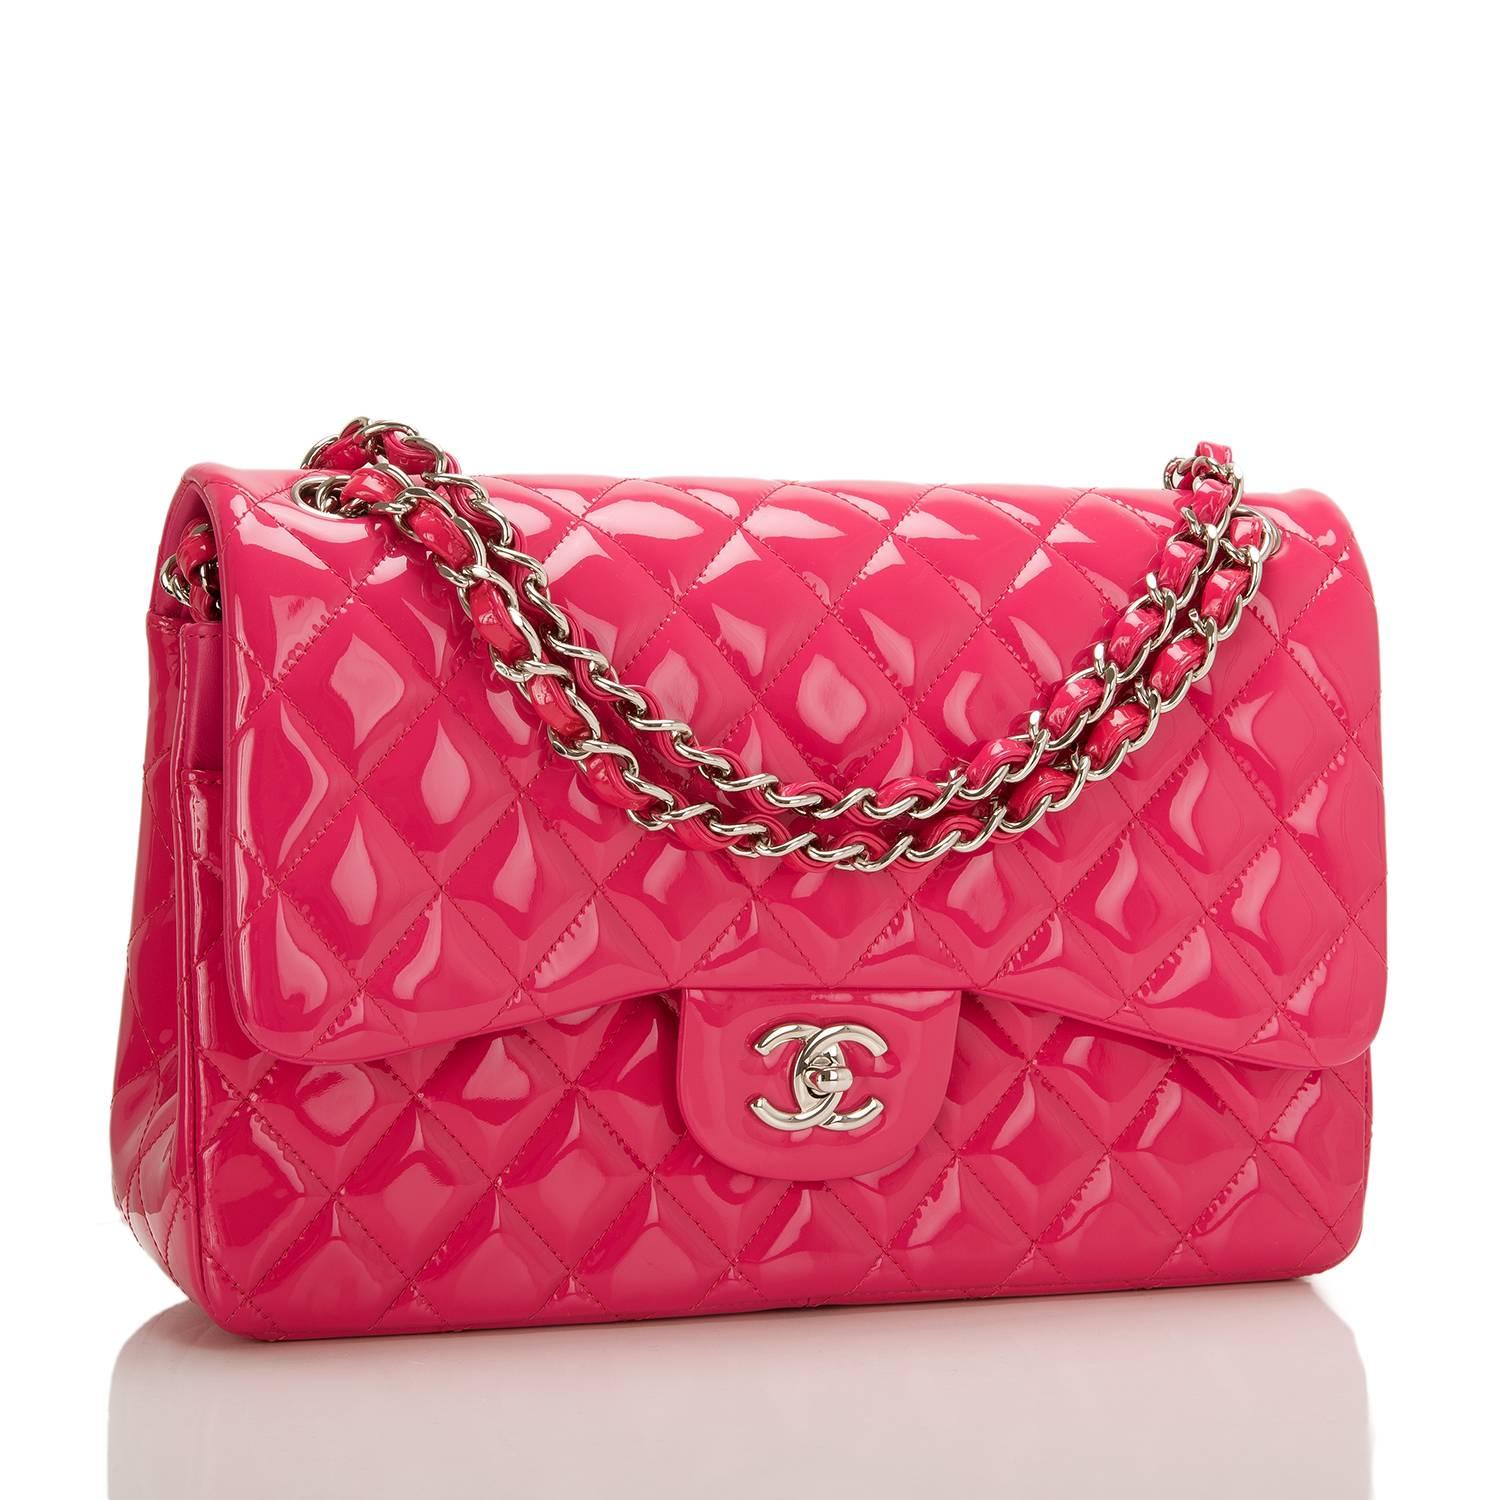 Chanel Jumbo Classic double flap bag of fuchsia pink patent leather with silver tone hardware.

This bag features a front flap with signature CC turnlock closure, a half moon back pocket, and an adjustable interwoven silver tone chain link with